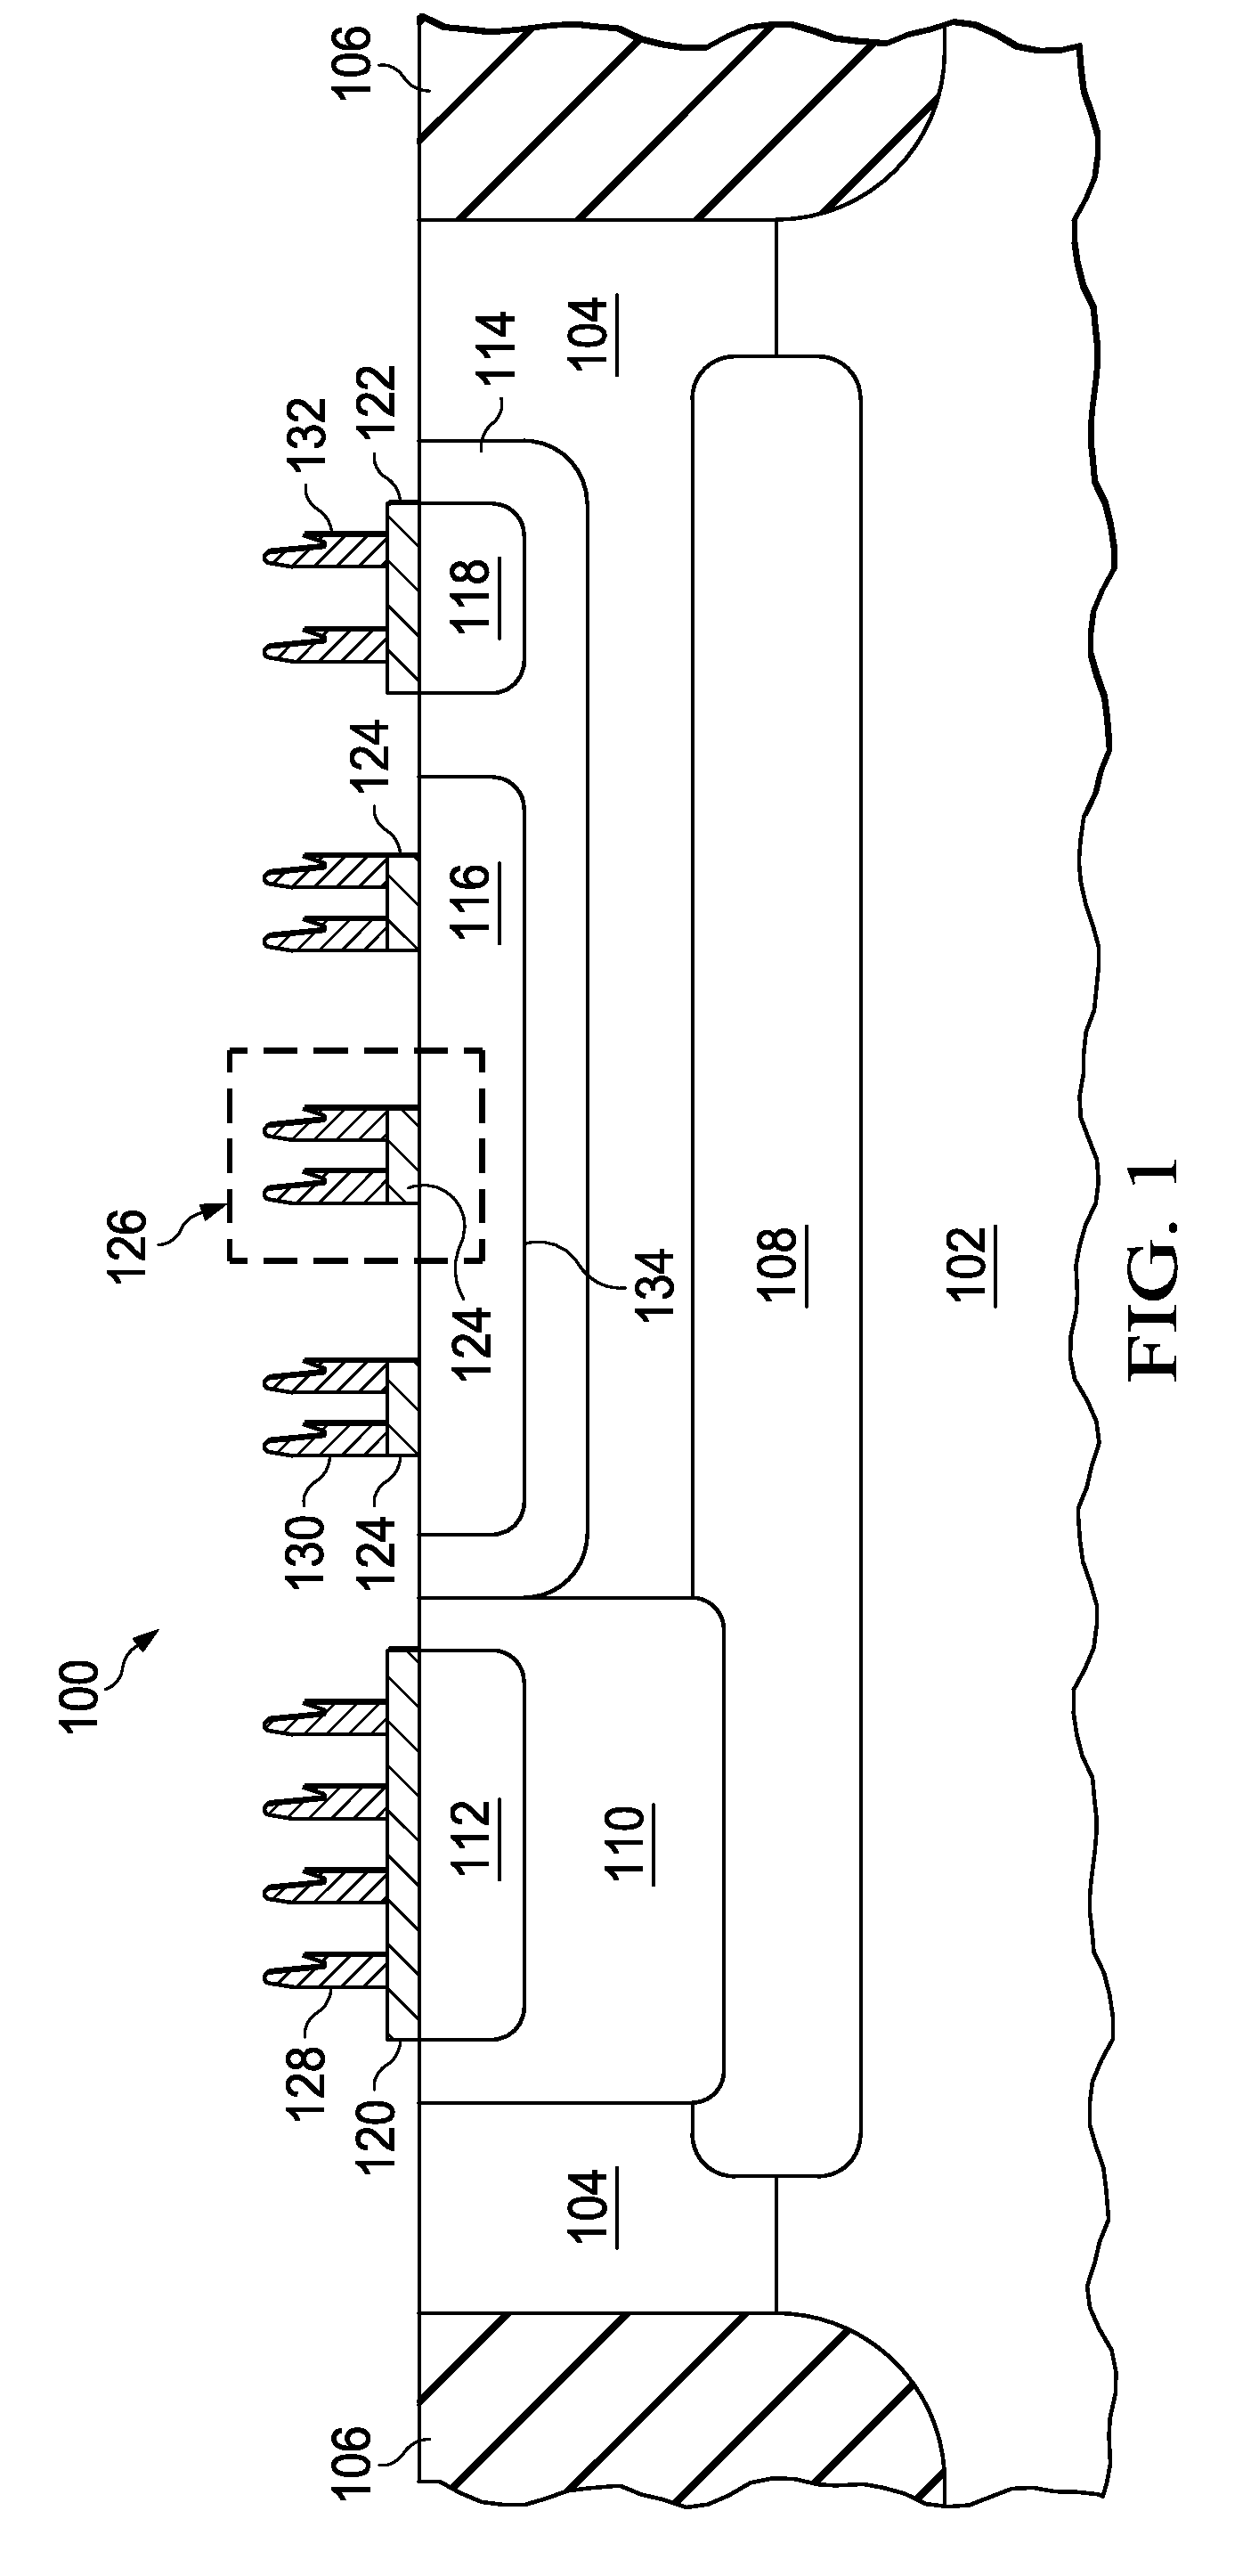 Emitter Ballasting by Contact Area Segmentation in ESD Bipolar Based Semiconductor Component